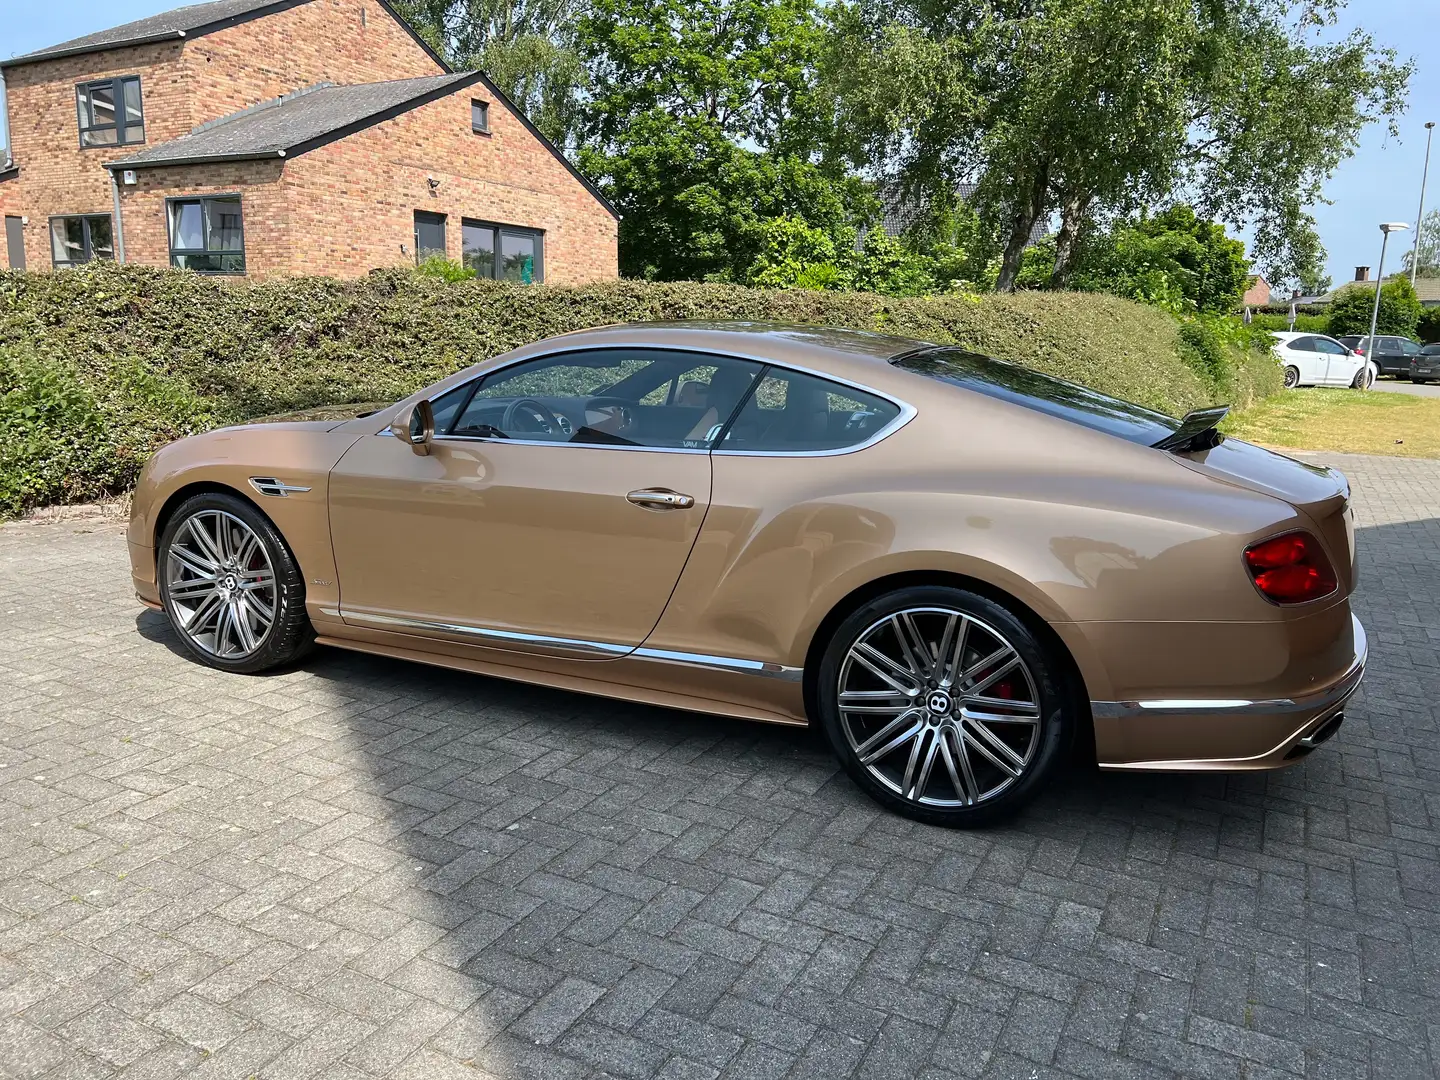 Bentley Continental GT SPEED W12 LIMITED 1 OF 21 GOLD NEUF 1PROPRIO ! Or - 2